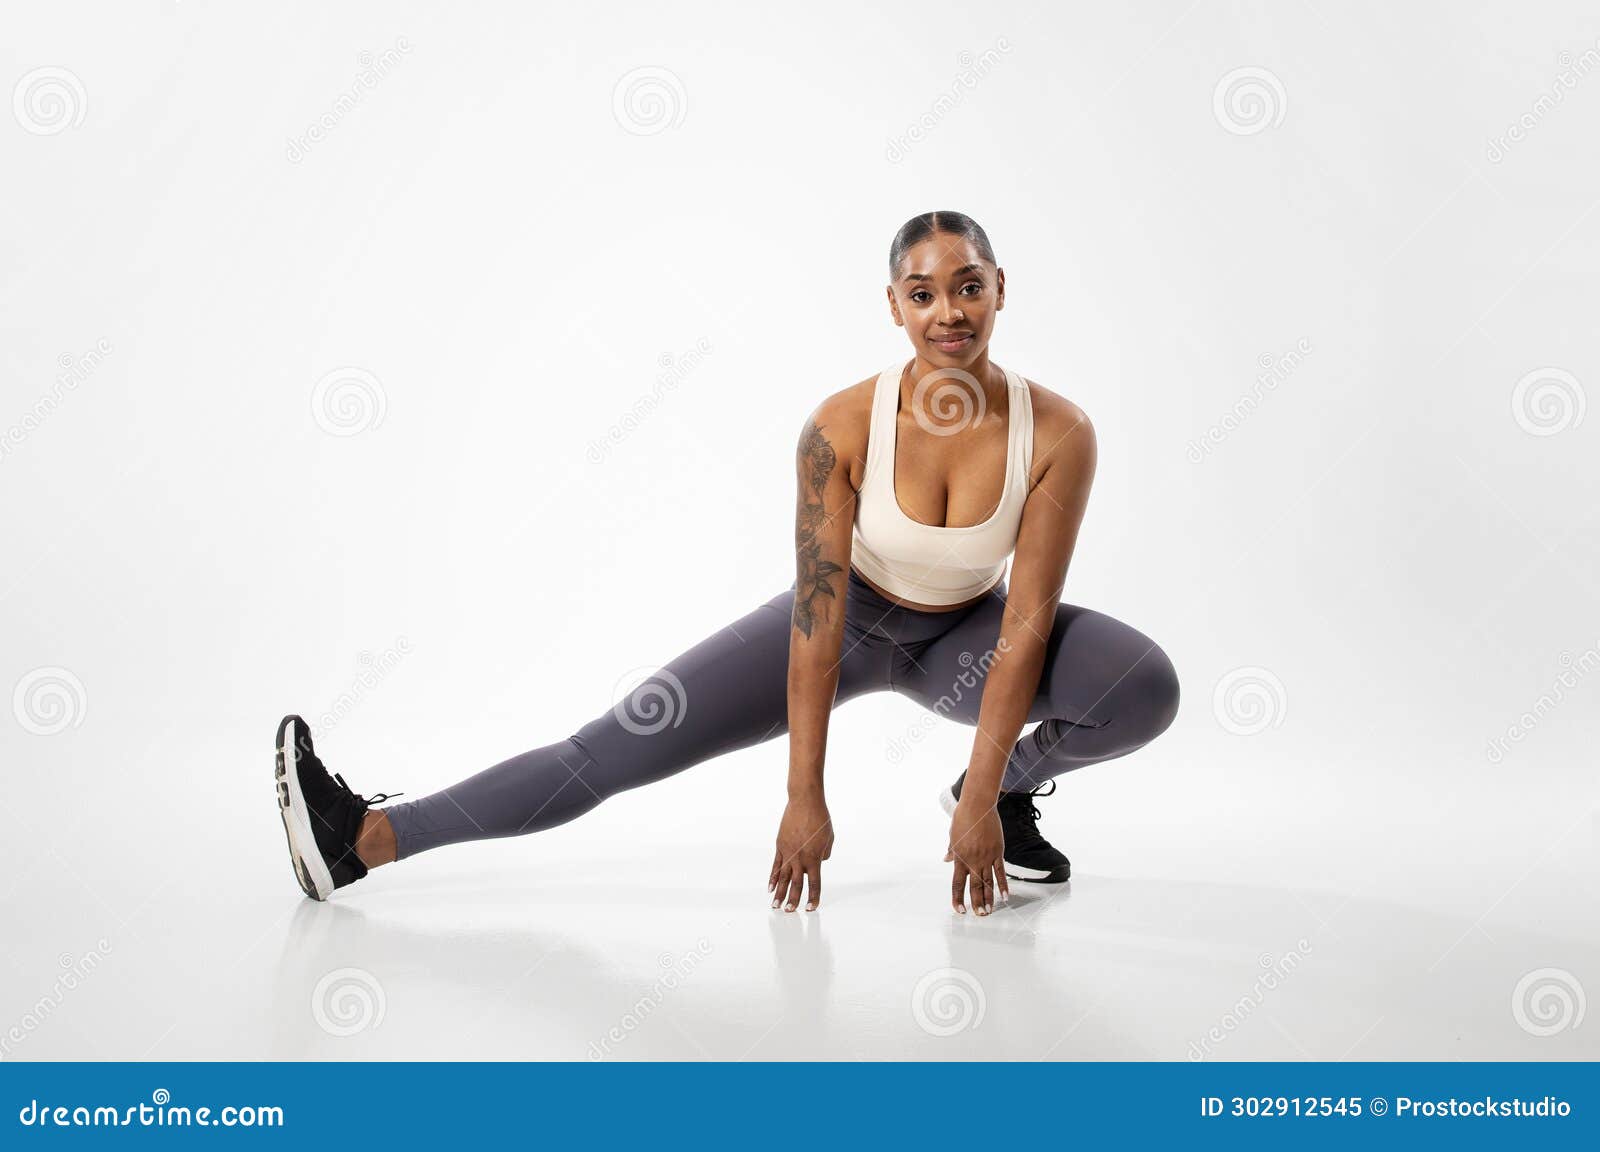 https://thumbs.dreamstime.com/z/athletic-african-american-woman-exercising-stretching-legs-muscles-extended-leg-squat-pose-having-workout-training-over-white-302912545.jpg